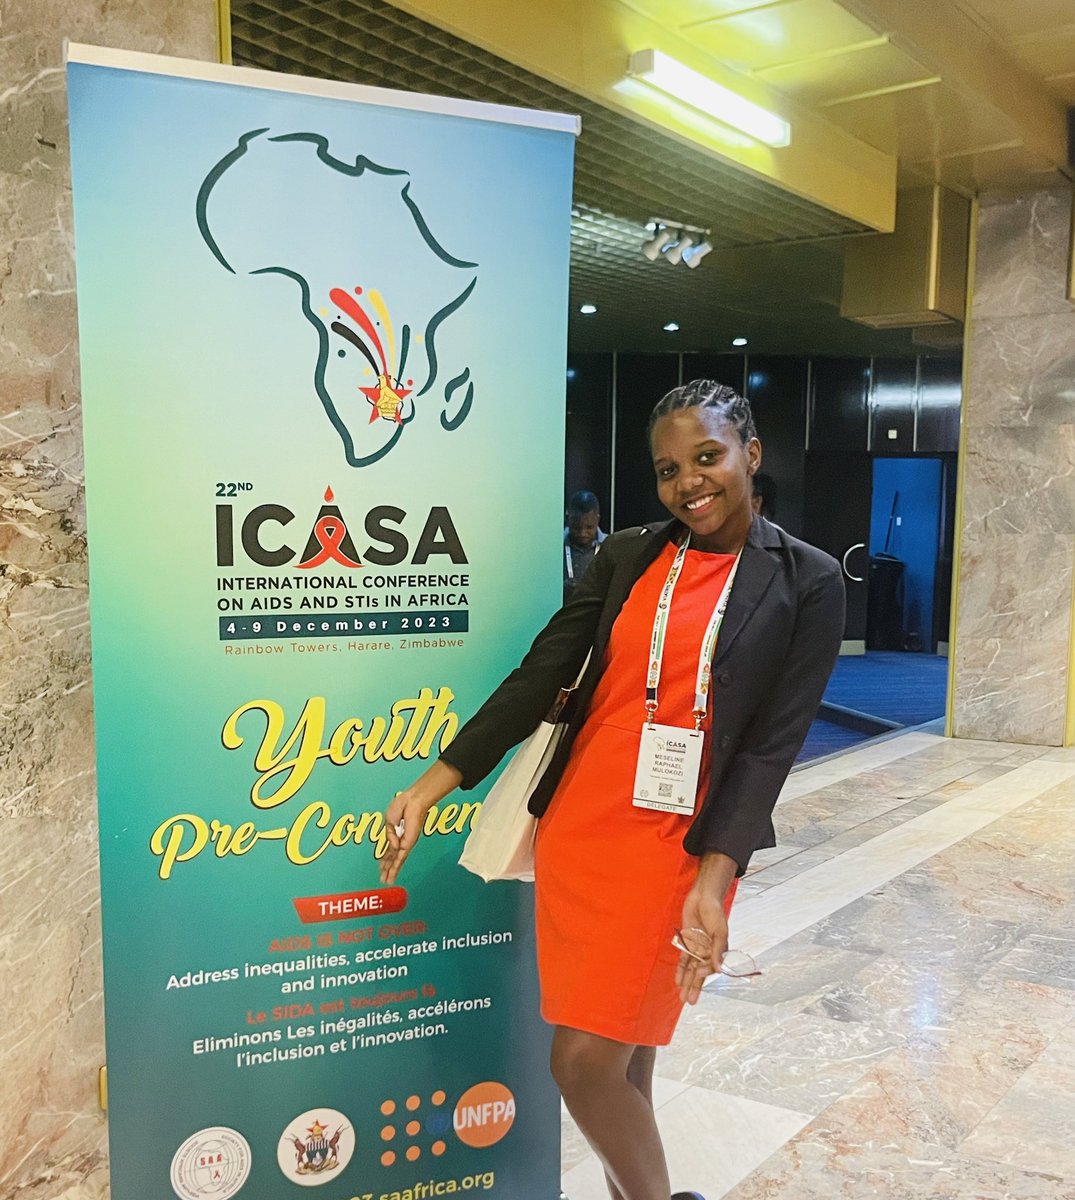 While i was at ICASA 2023 i attended the youth pre conference . Just a reminder we account for a larger percentage of world population hence when we cooperate our voices will be held .
#ICASA2023